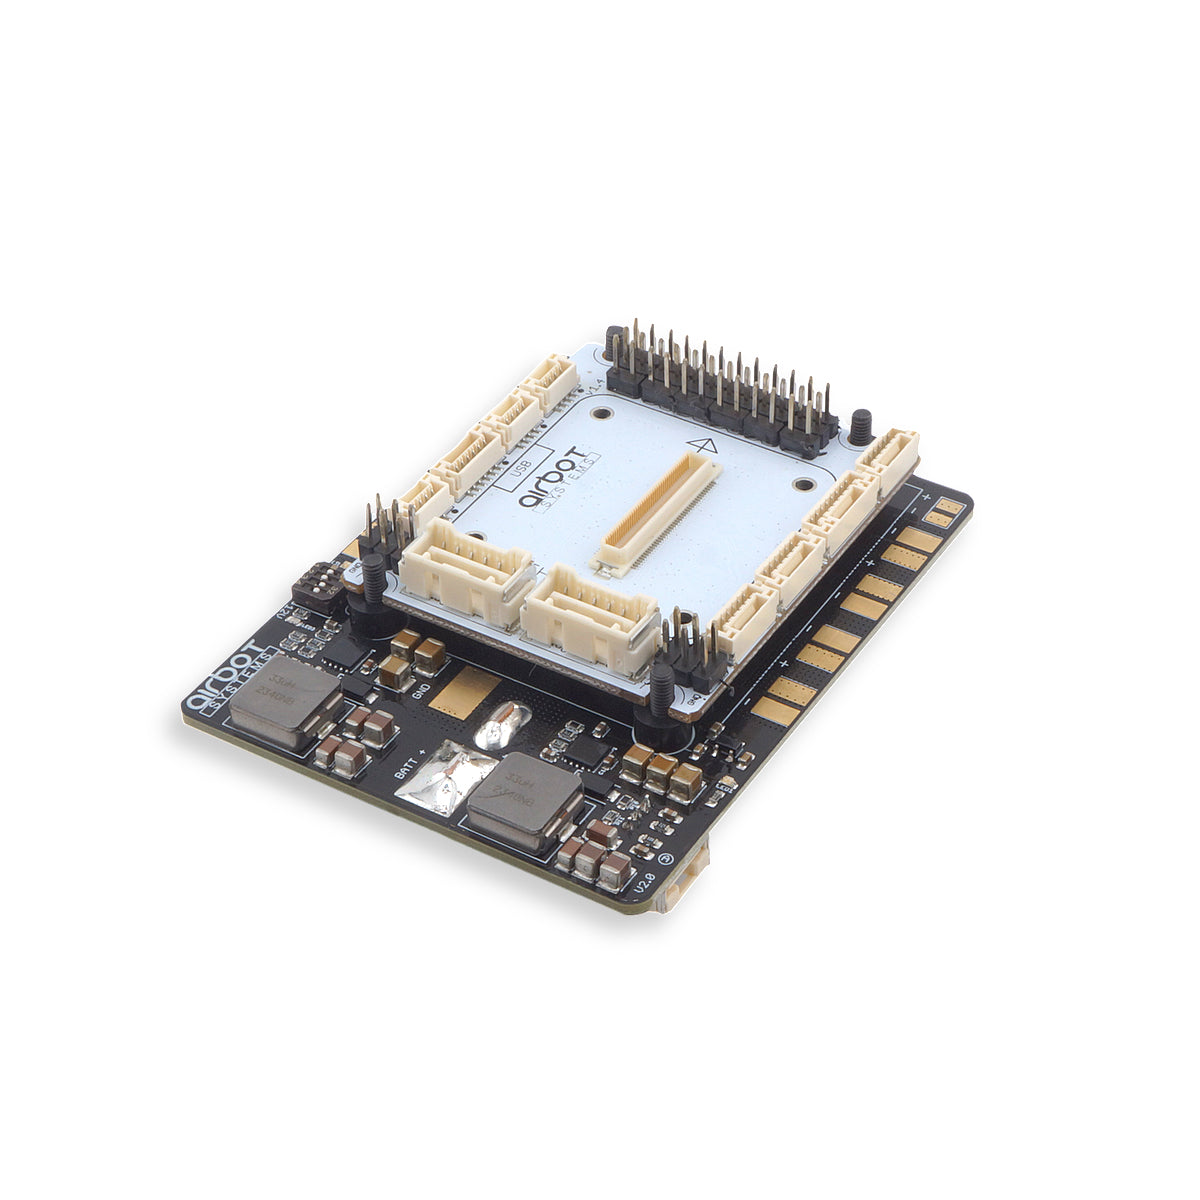 Airbot Mini Carrier Board PRO v2 – Full Set 100A